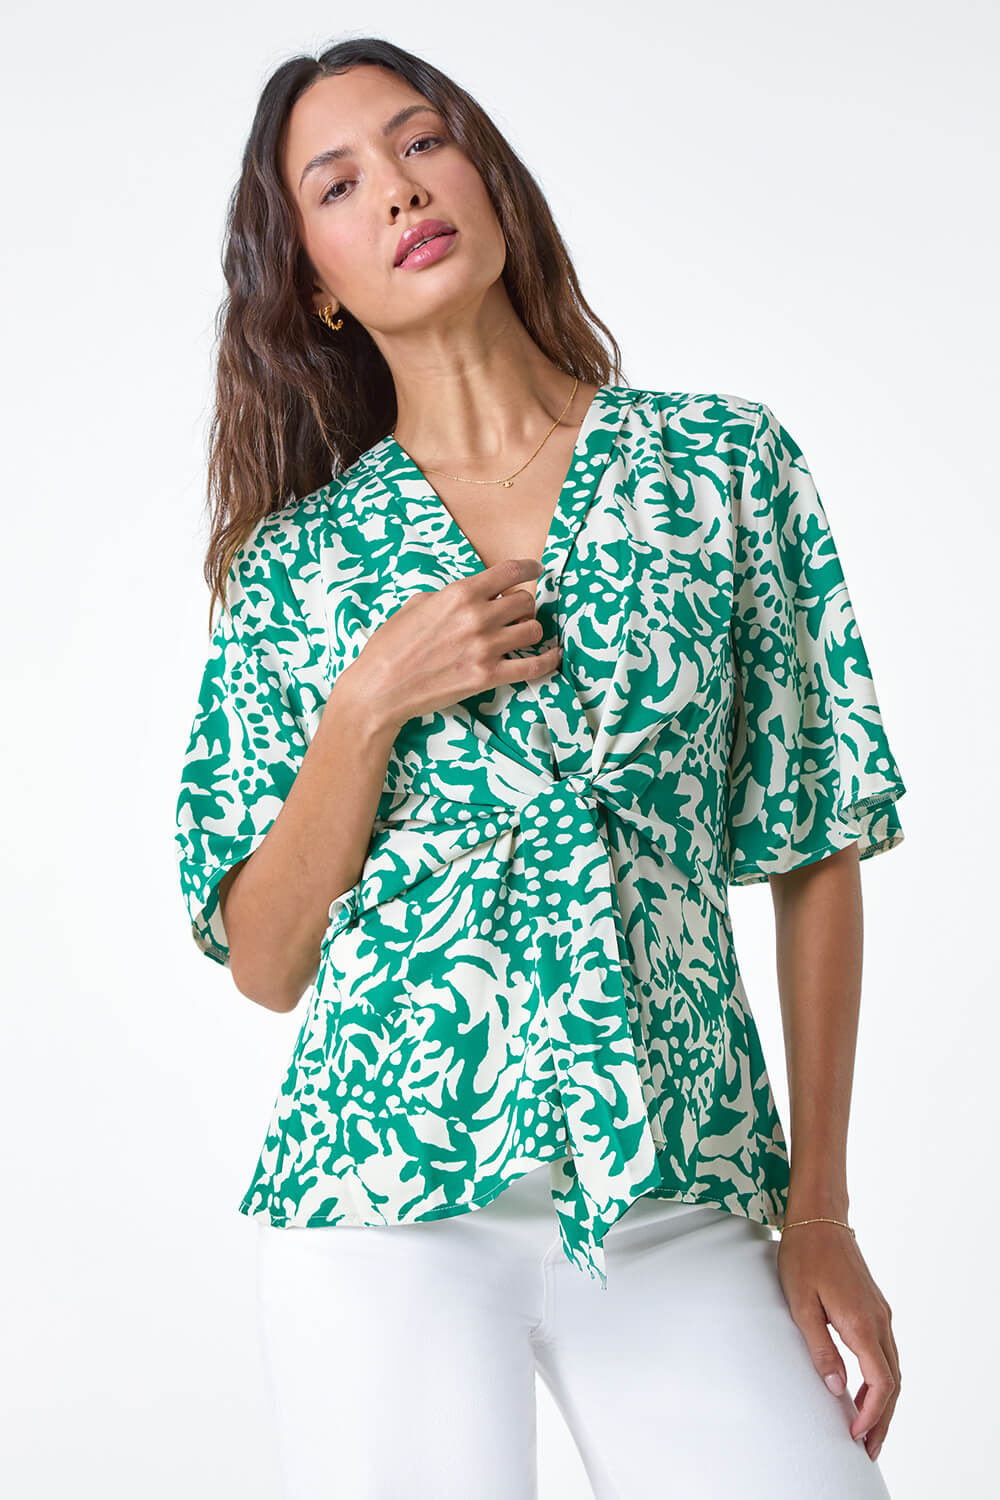 Green Floral Print Wrap Tie Top, Image 2 of 5